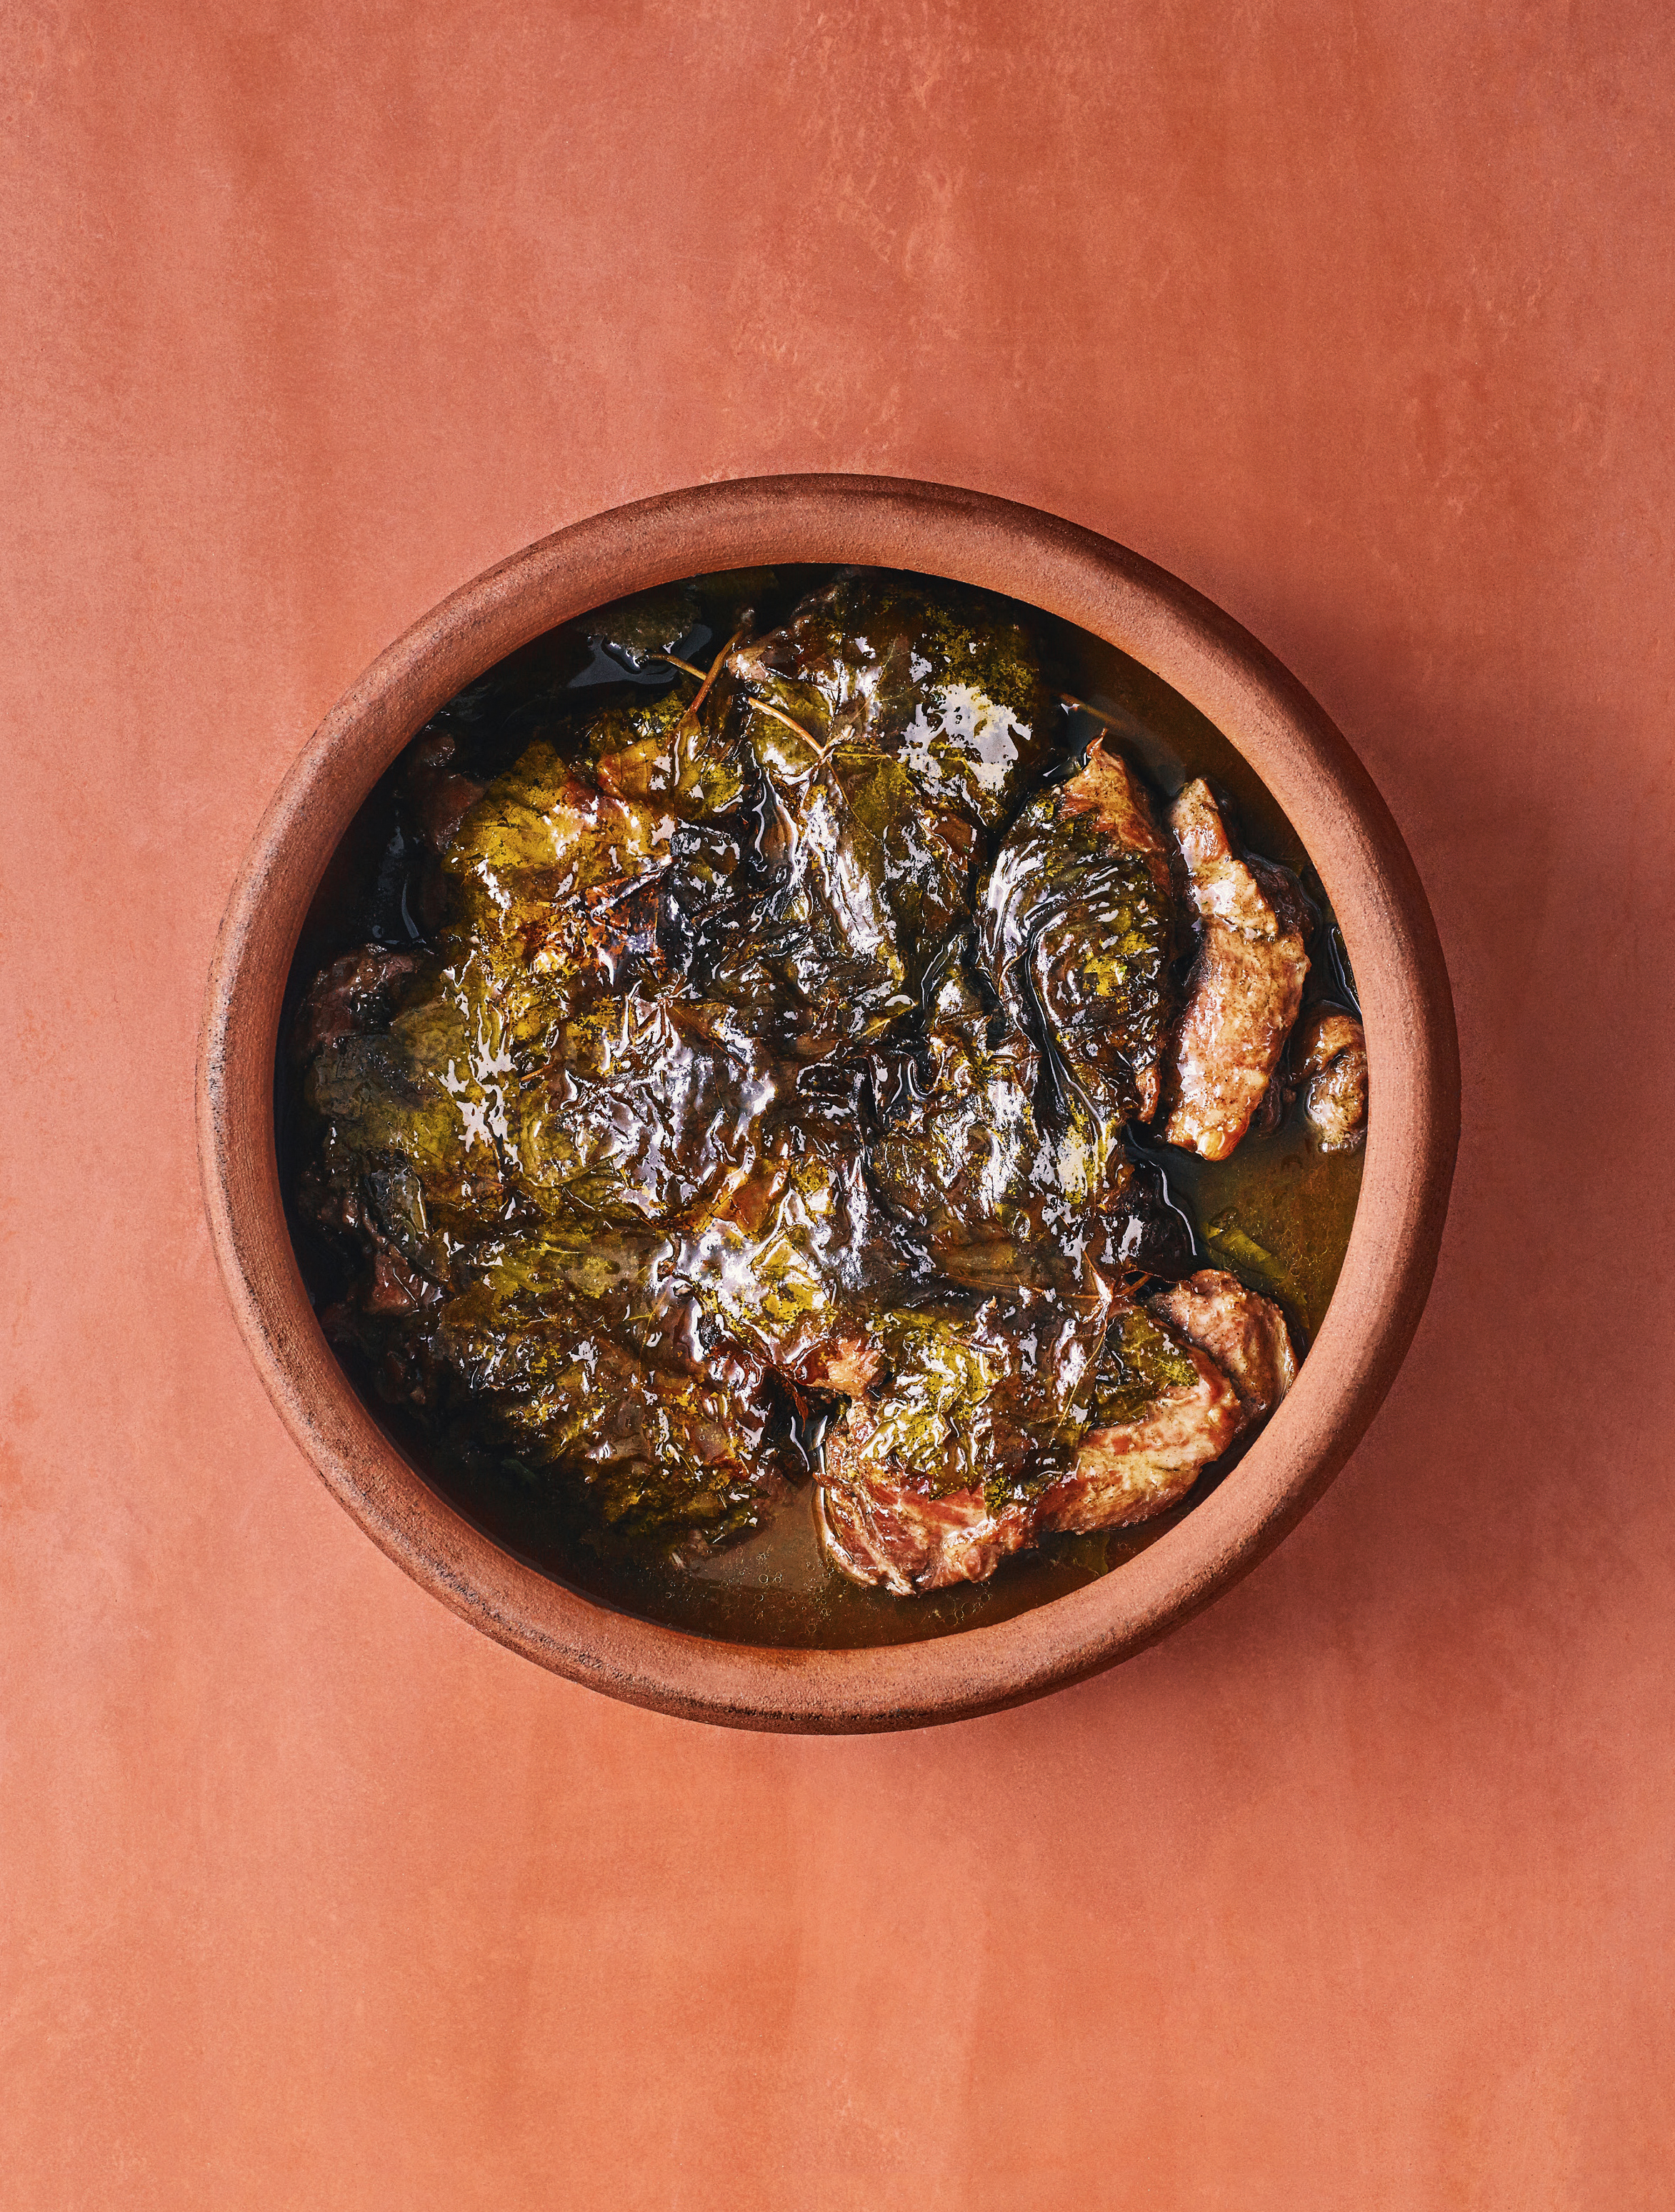 Grape leaves and braised short ribs